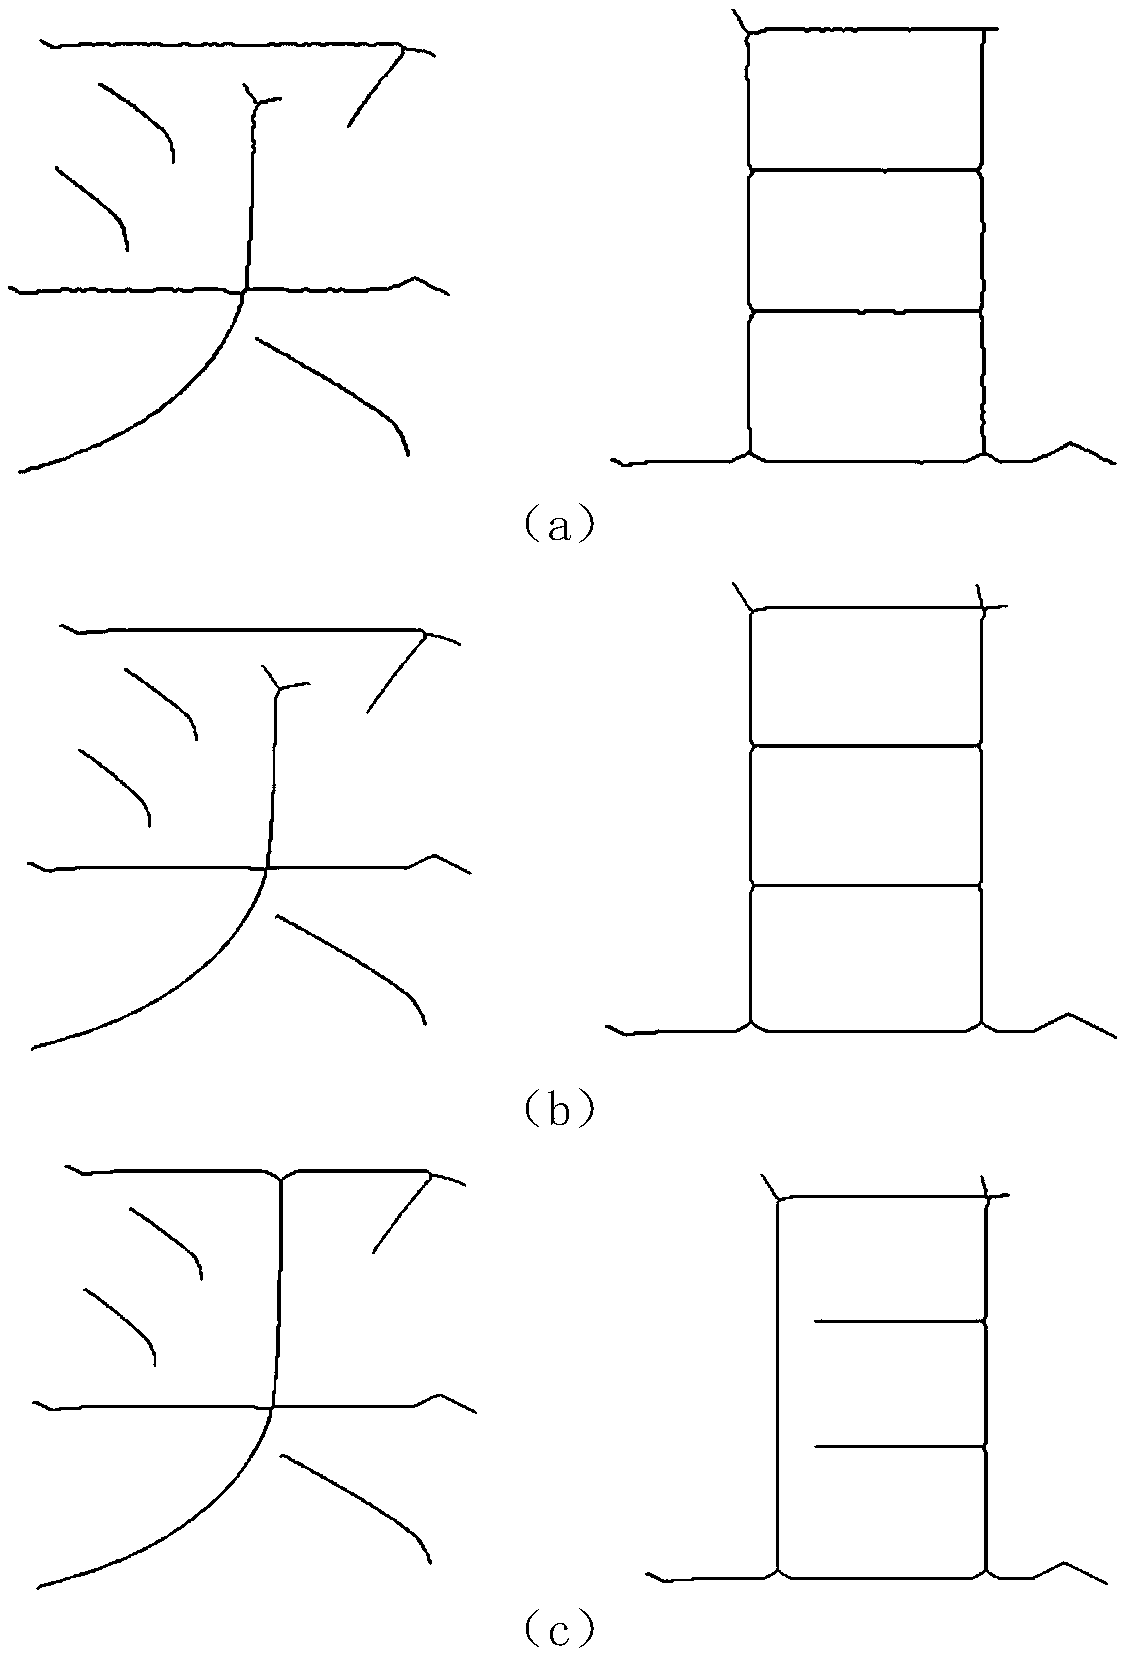 A watermark embedding method and apparatus in a text image